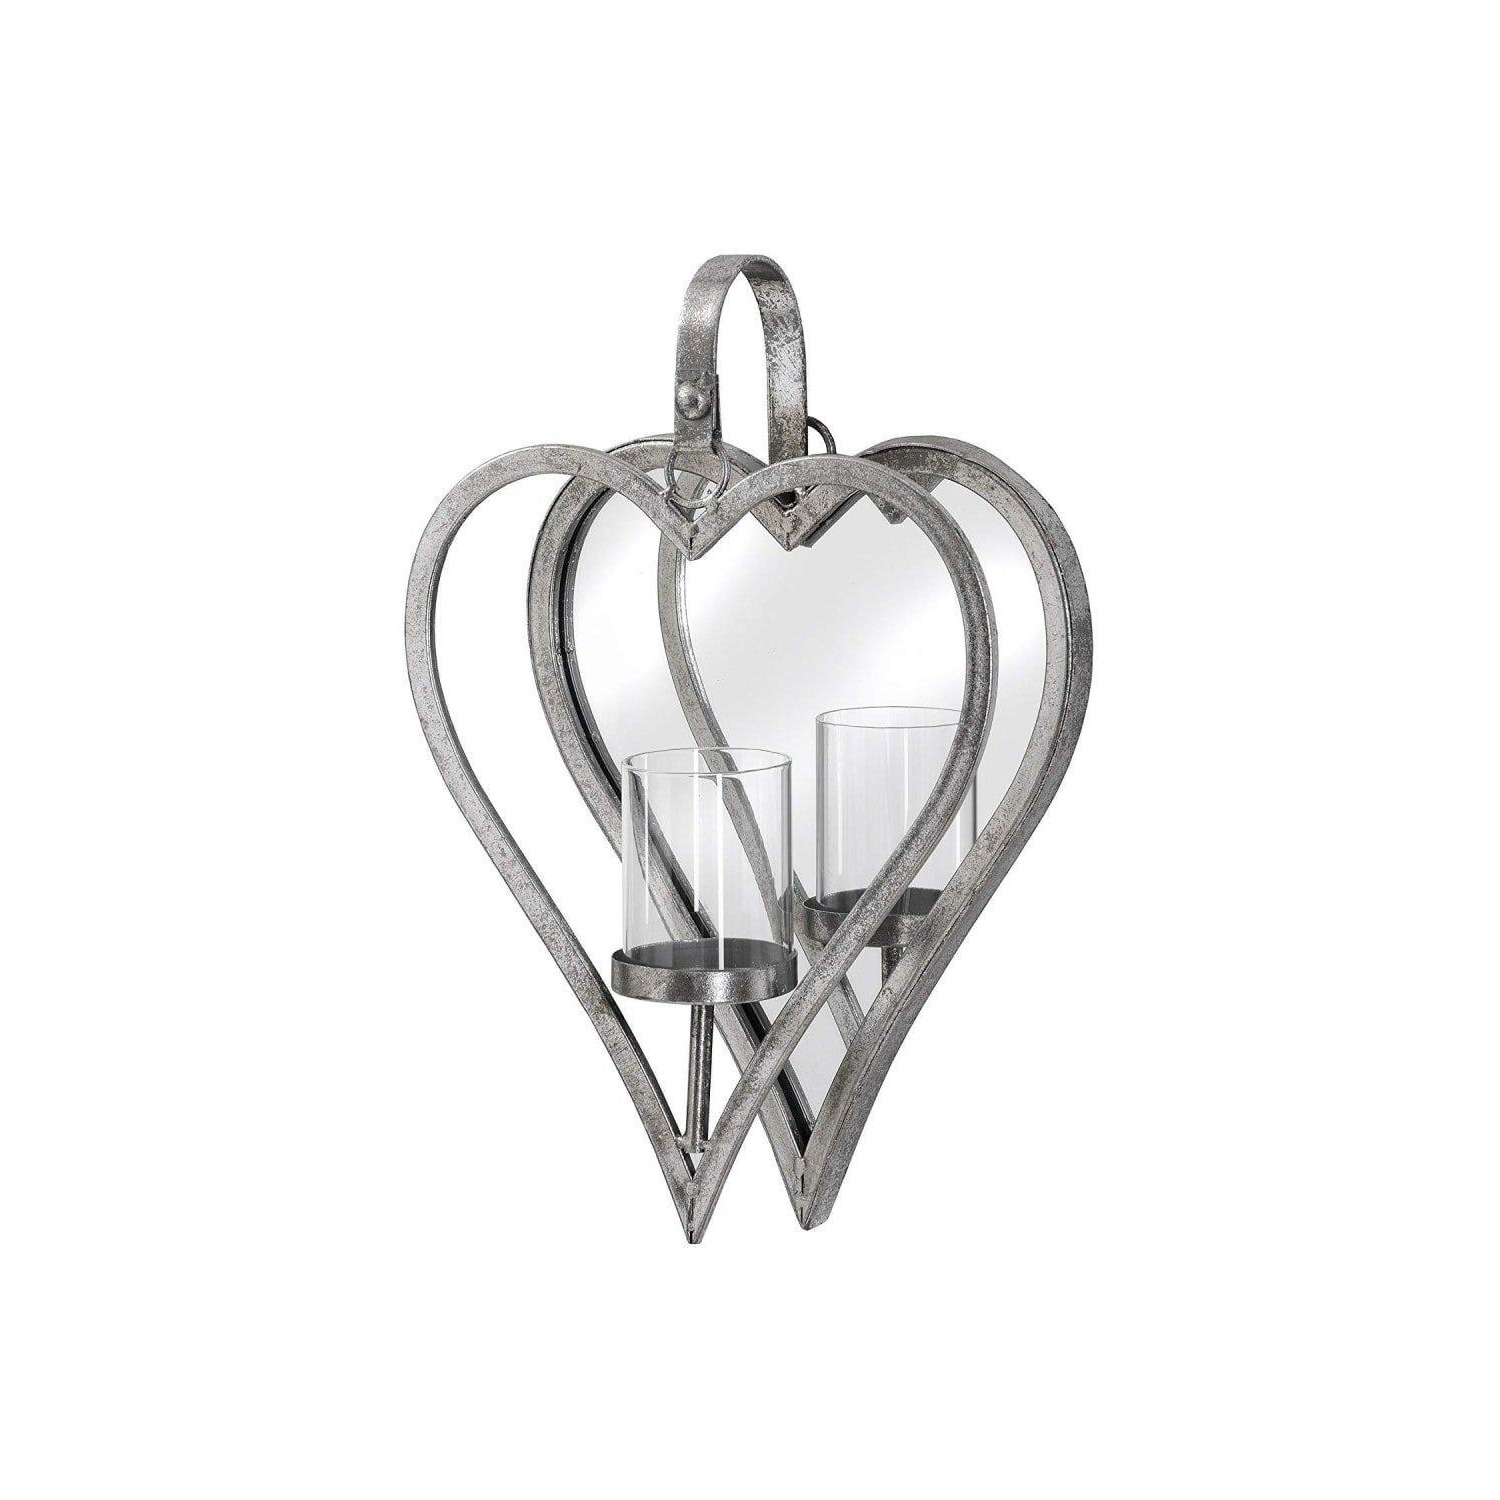 Small Antique Silver Mirrored Heart Candle Holder - image 1